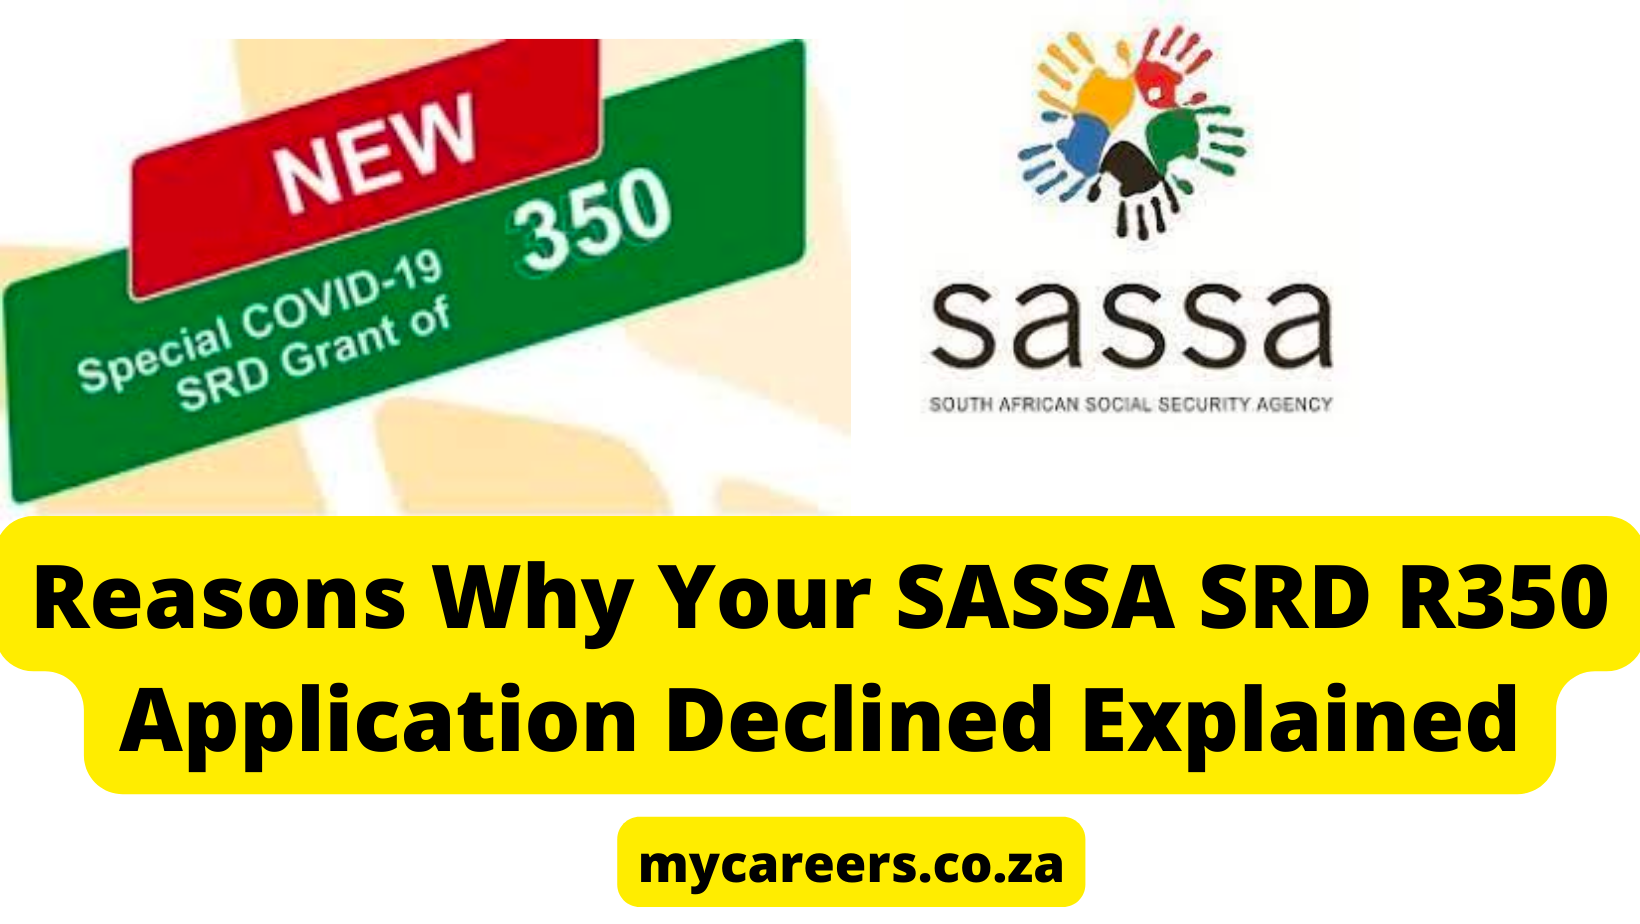 Reasons Why Your SASSA SRD R350 Application Declined Explained